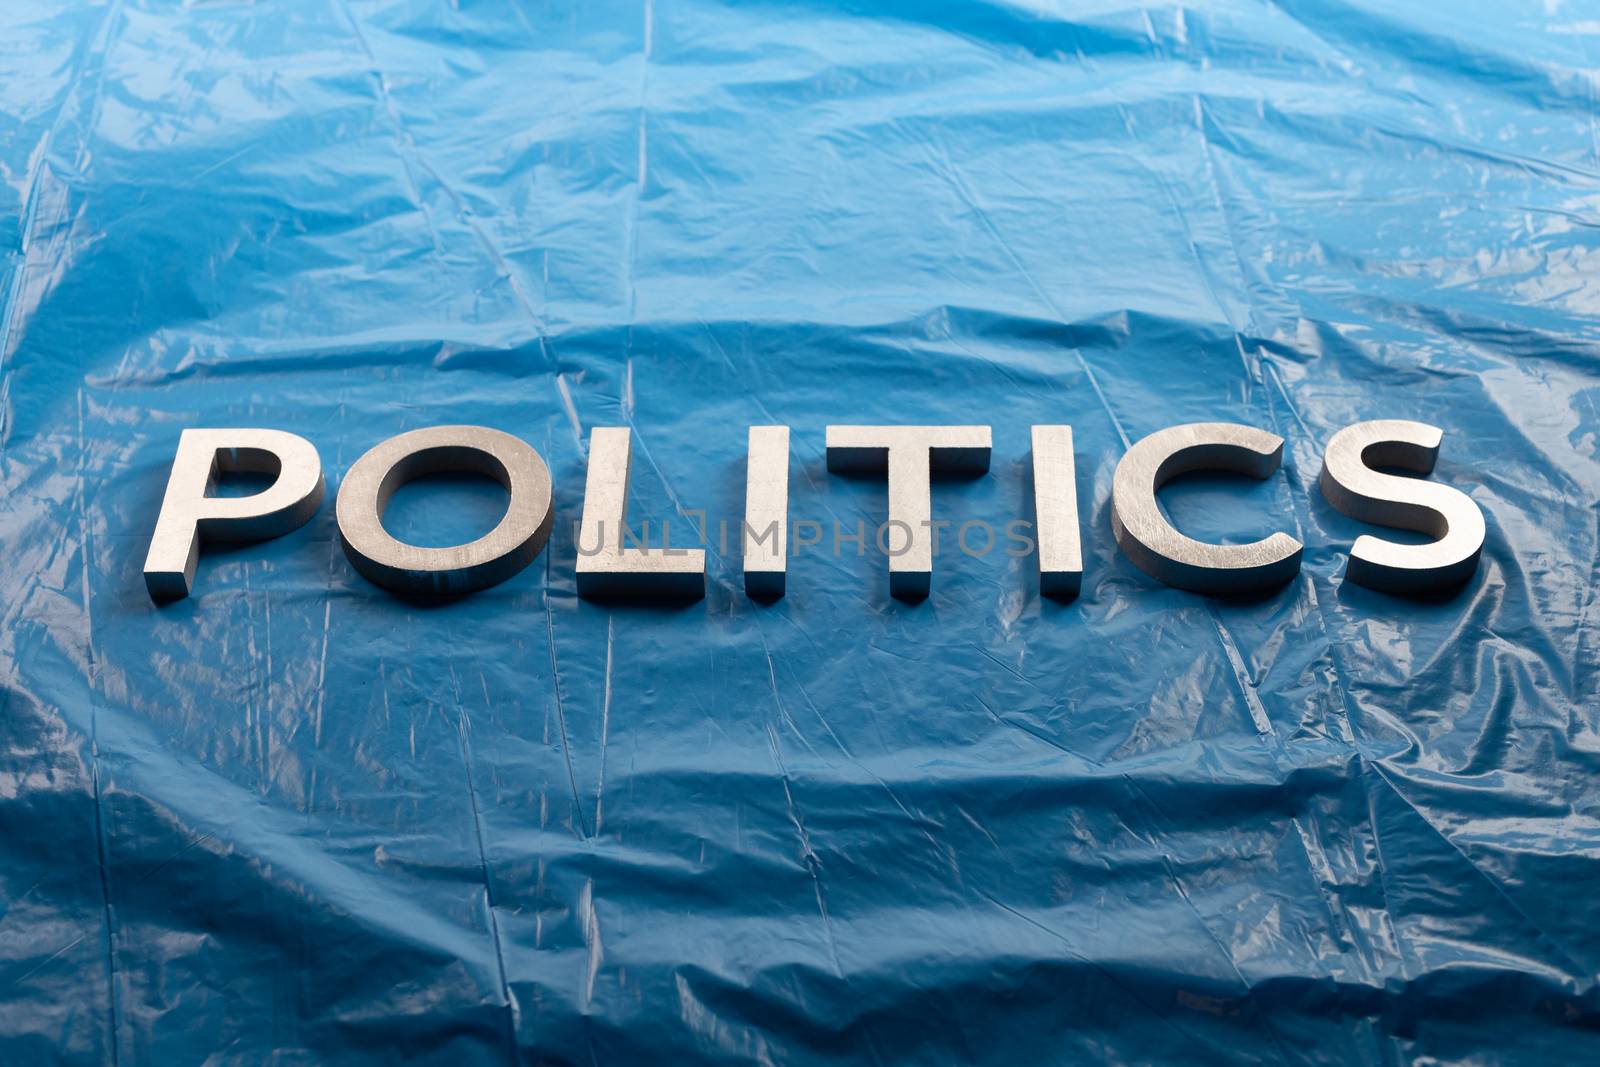 the word politics laid with silver aluminium letters over crumpled plastic blue film background - in center of picture.